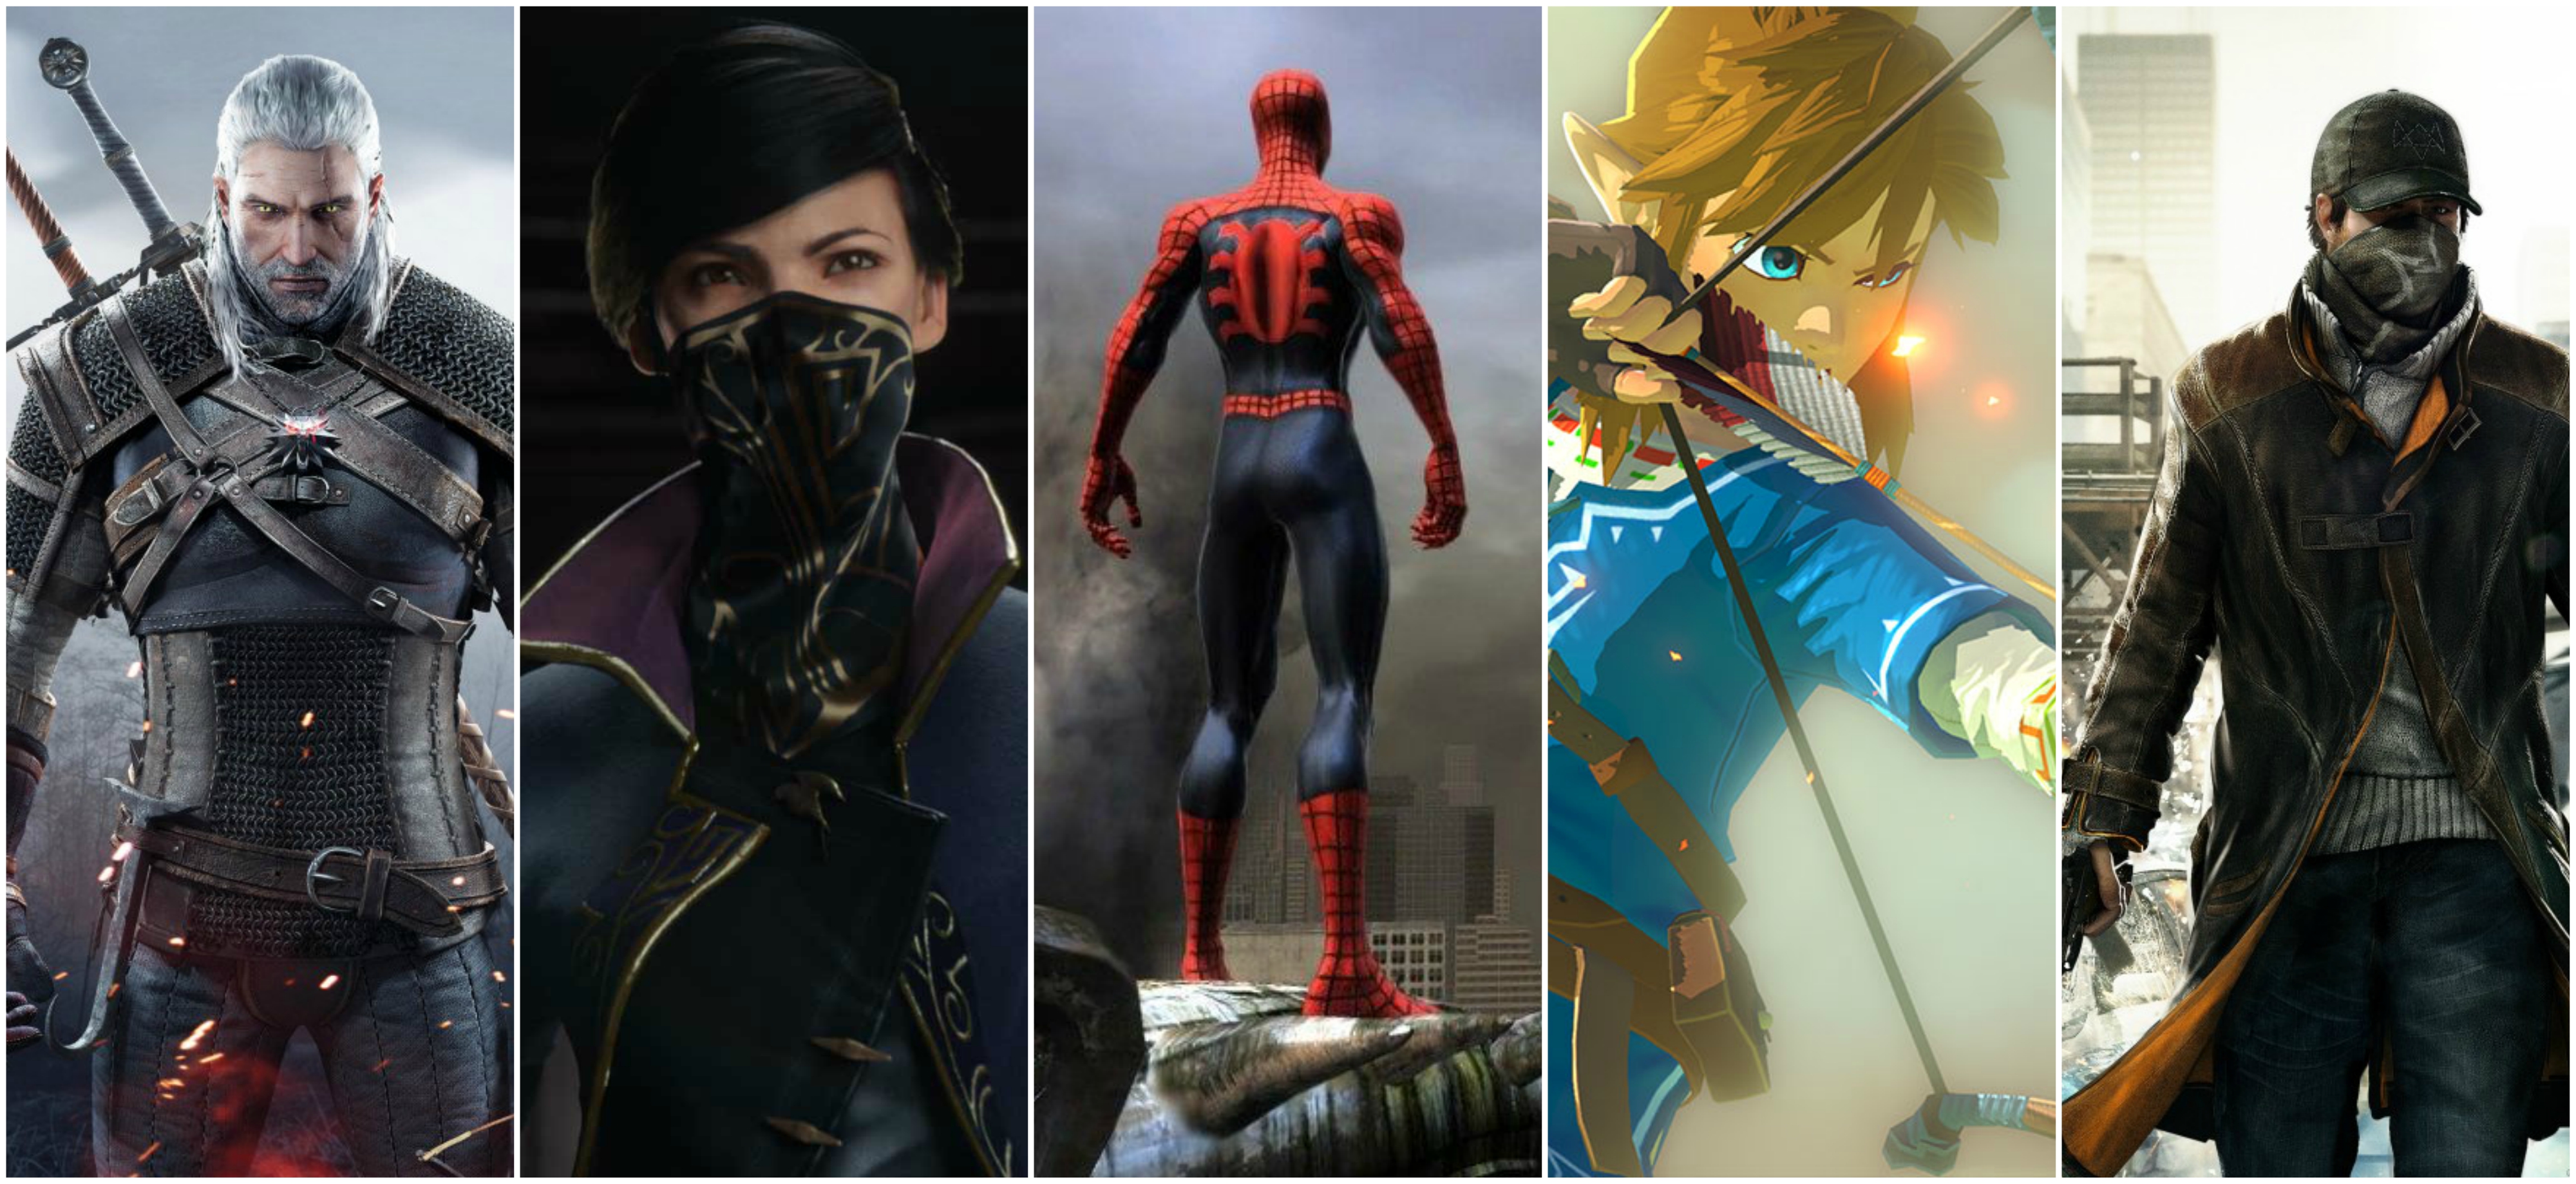 7 Things We’re Expecting to See at E3 2016